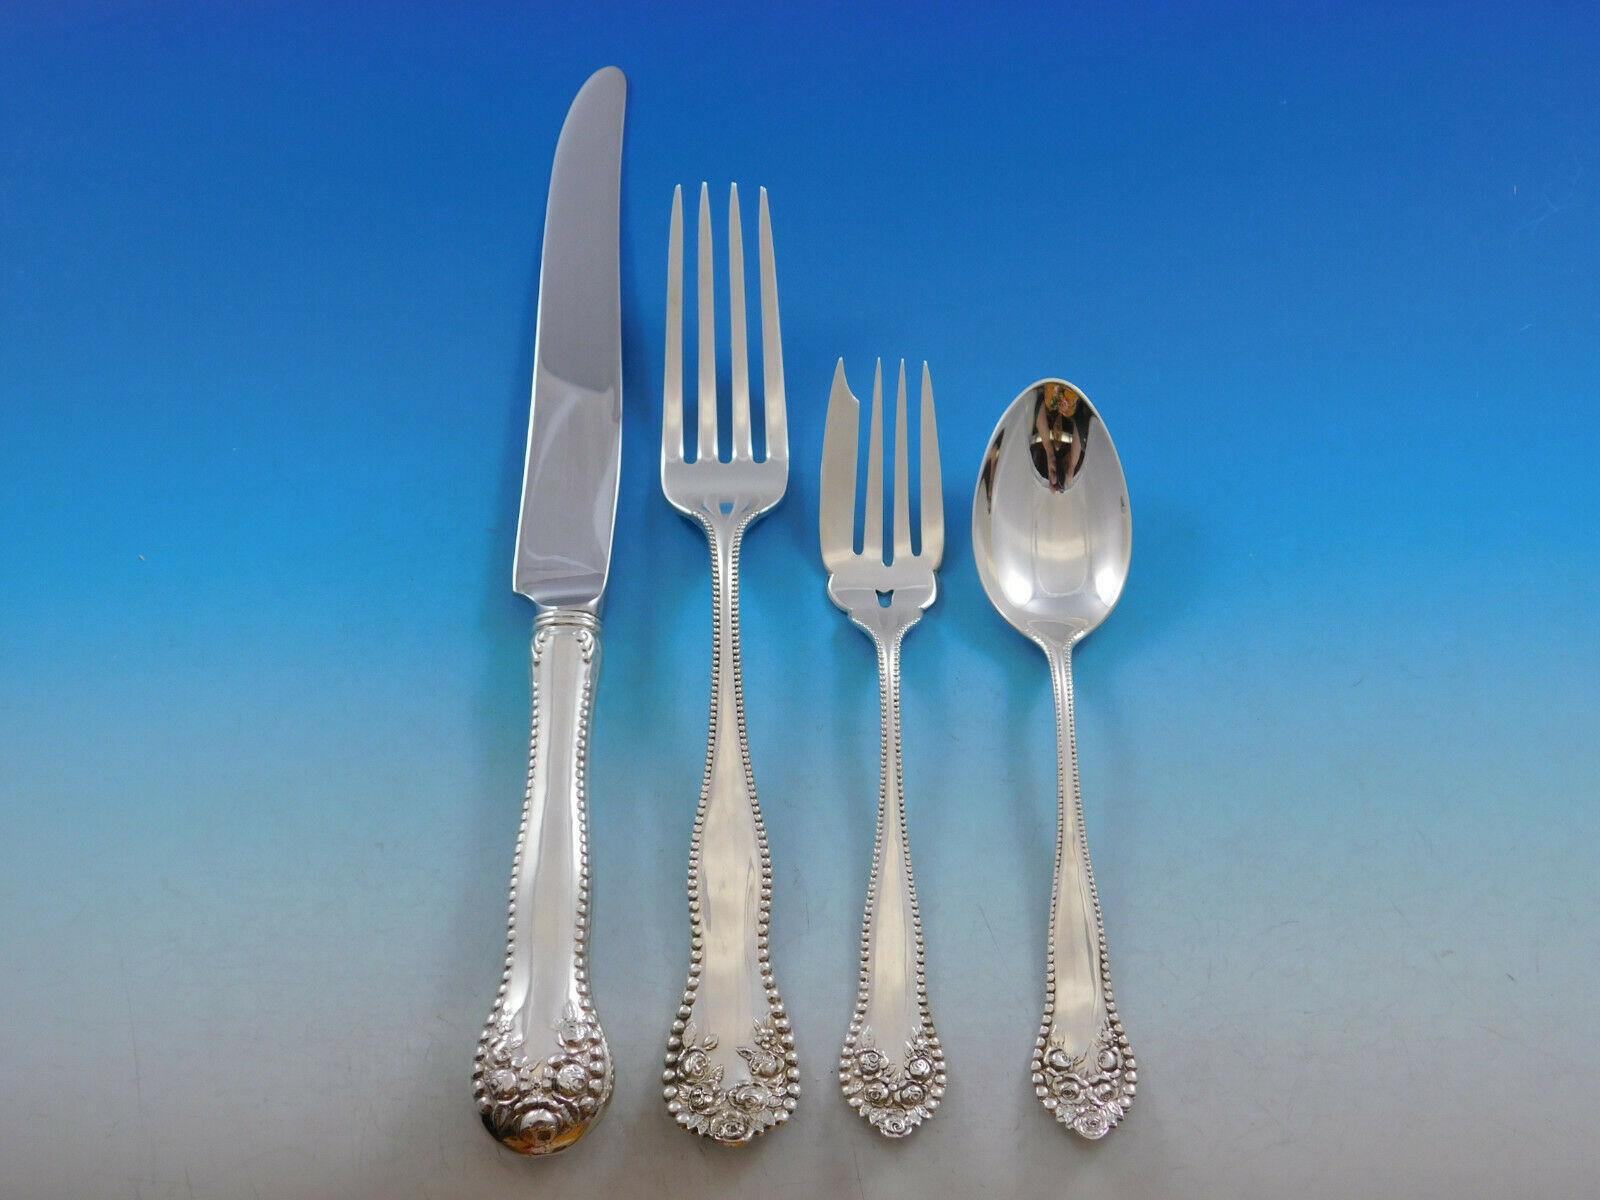 Dinner size Lancaster by Gorham sterling silver flatware set, 64 Pieces. This popular beaded pattern with intricate rose detailing was introduced by Gorham in the year 1897. This set includes:

8 dinner knives, 9 5/8